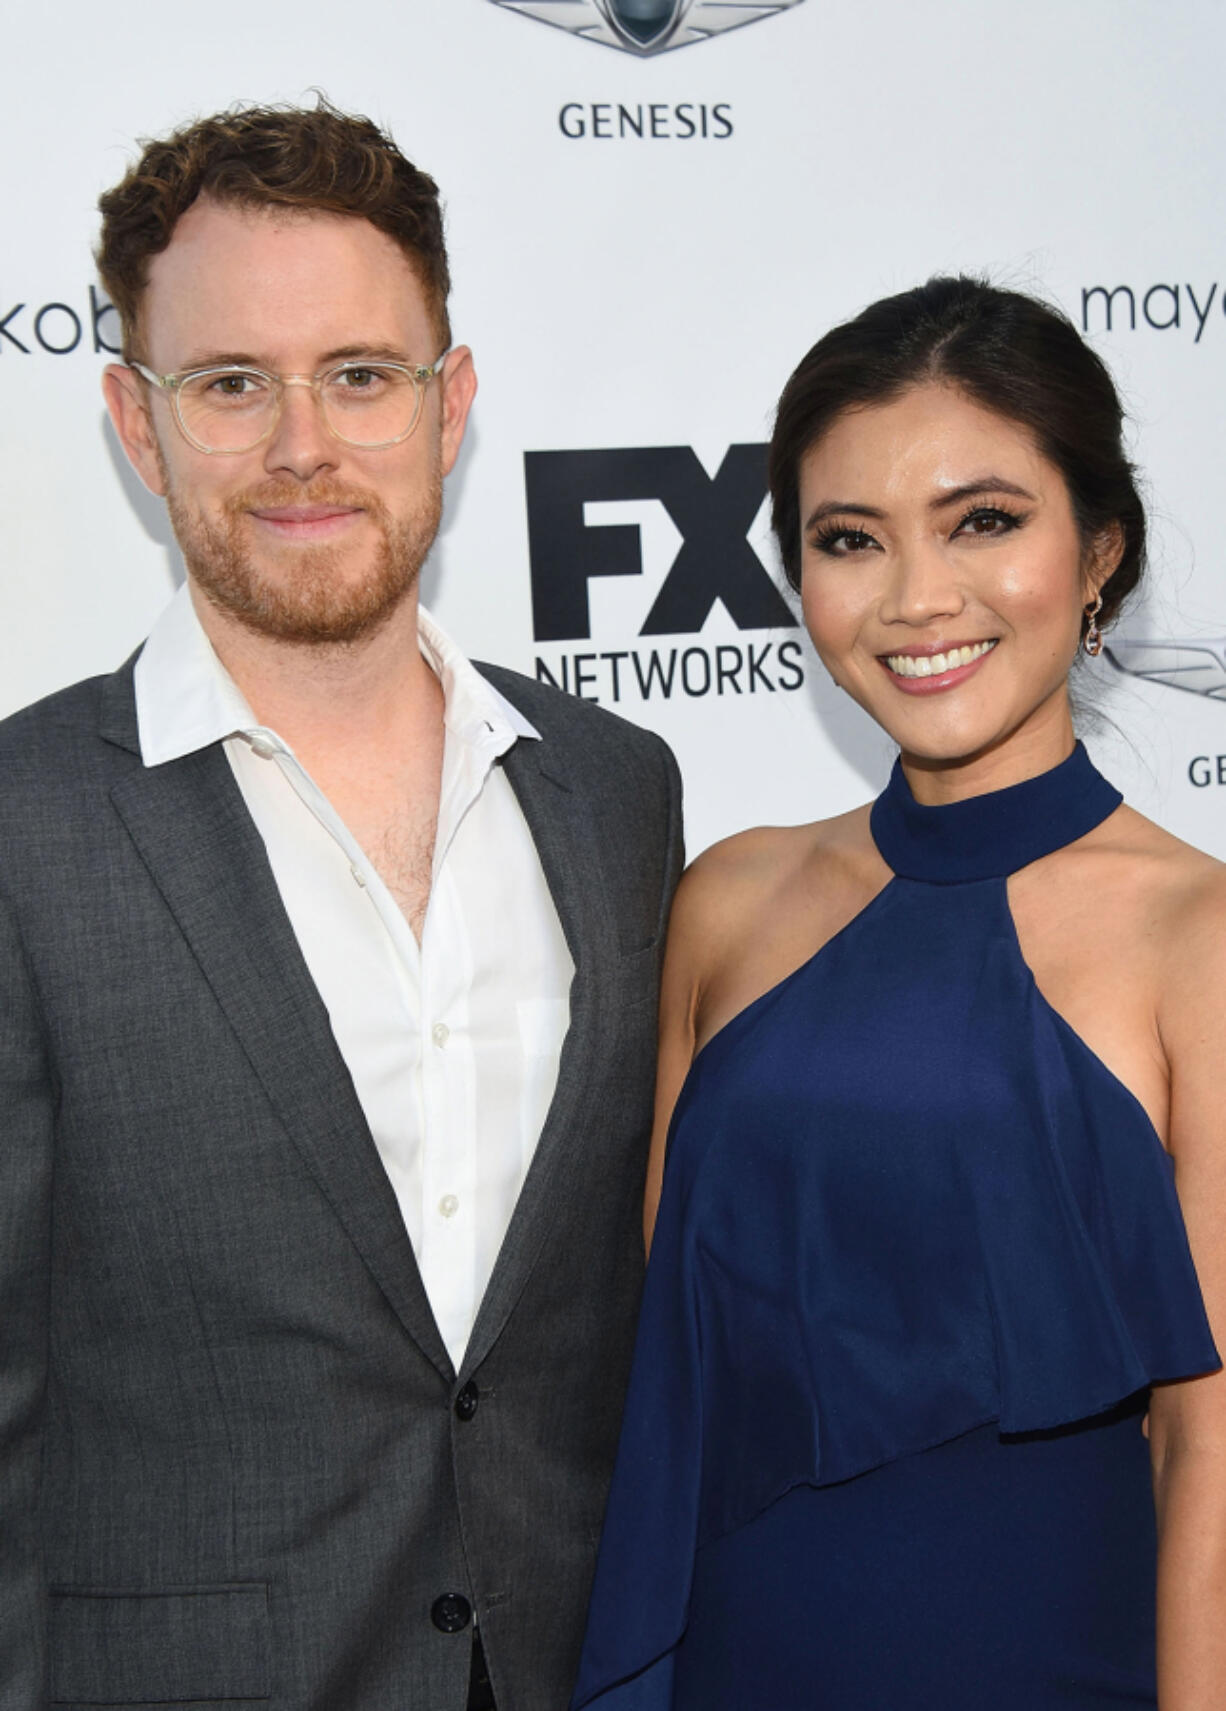 Christian Sprenger, left, and Jessica Lu  attend FX Networks celebration of their Emmy nominees at CRAFT LA on Sept. 16, 2018, in Los Angeles.